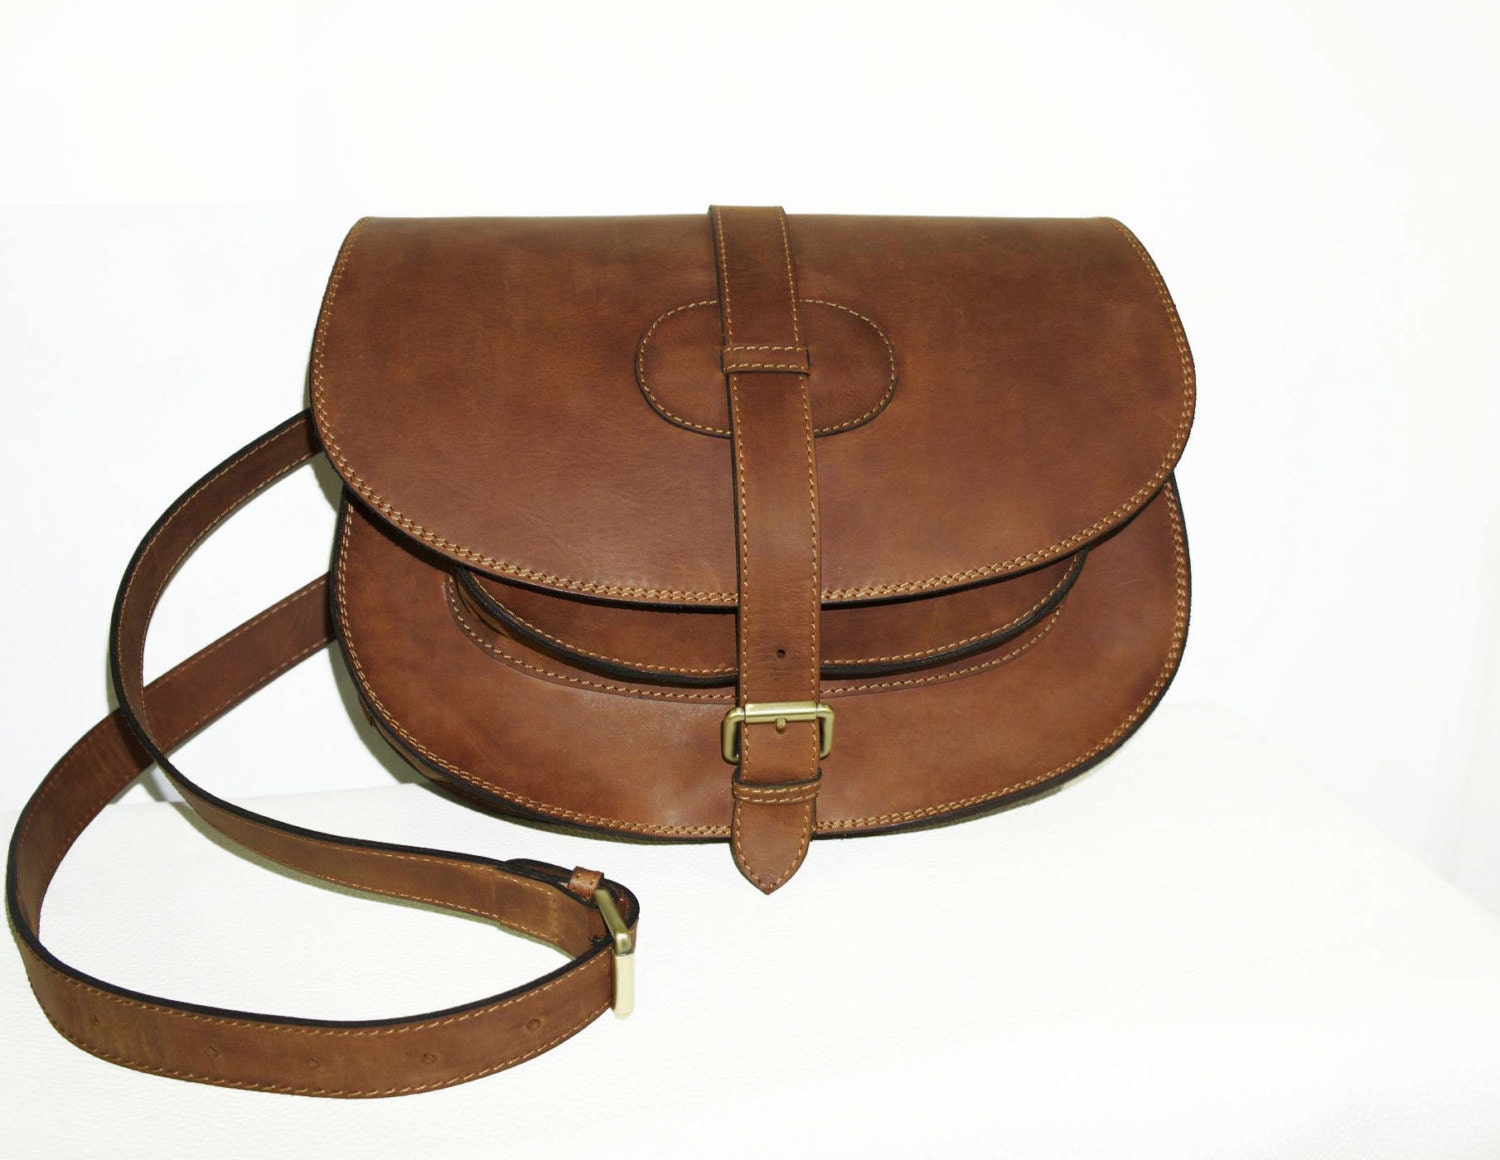 Goldmann xl-medium brown leather saddle bag leather by ChicLeather